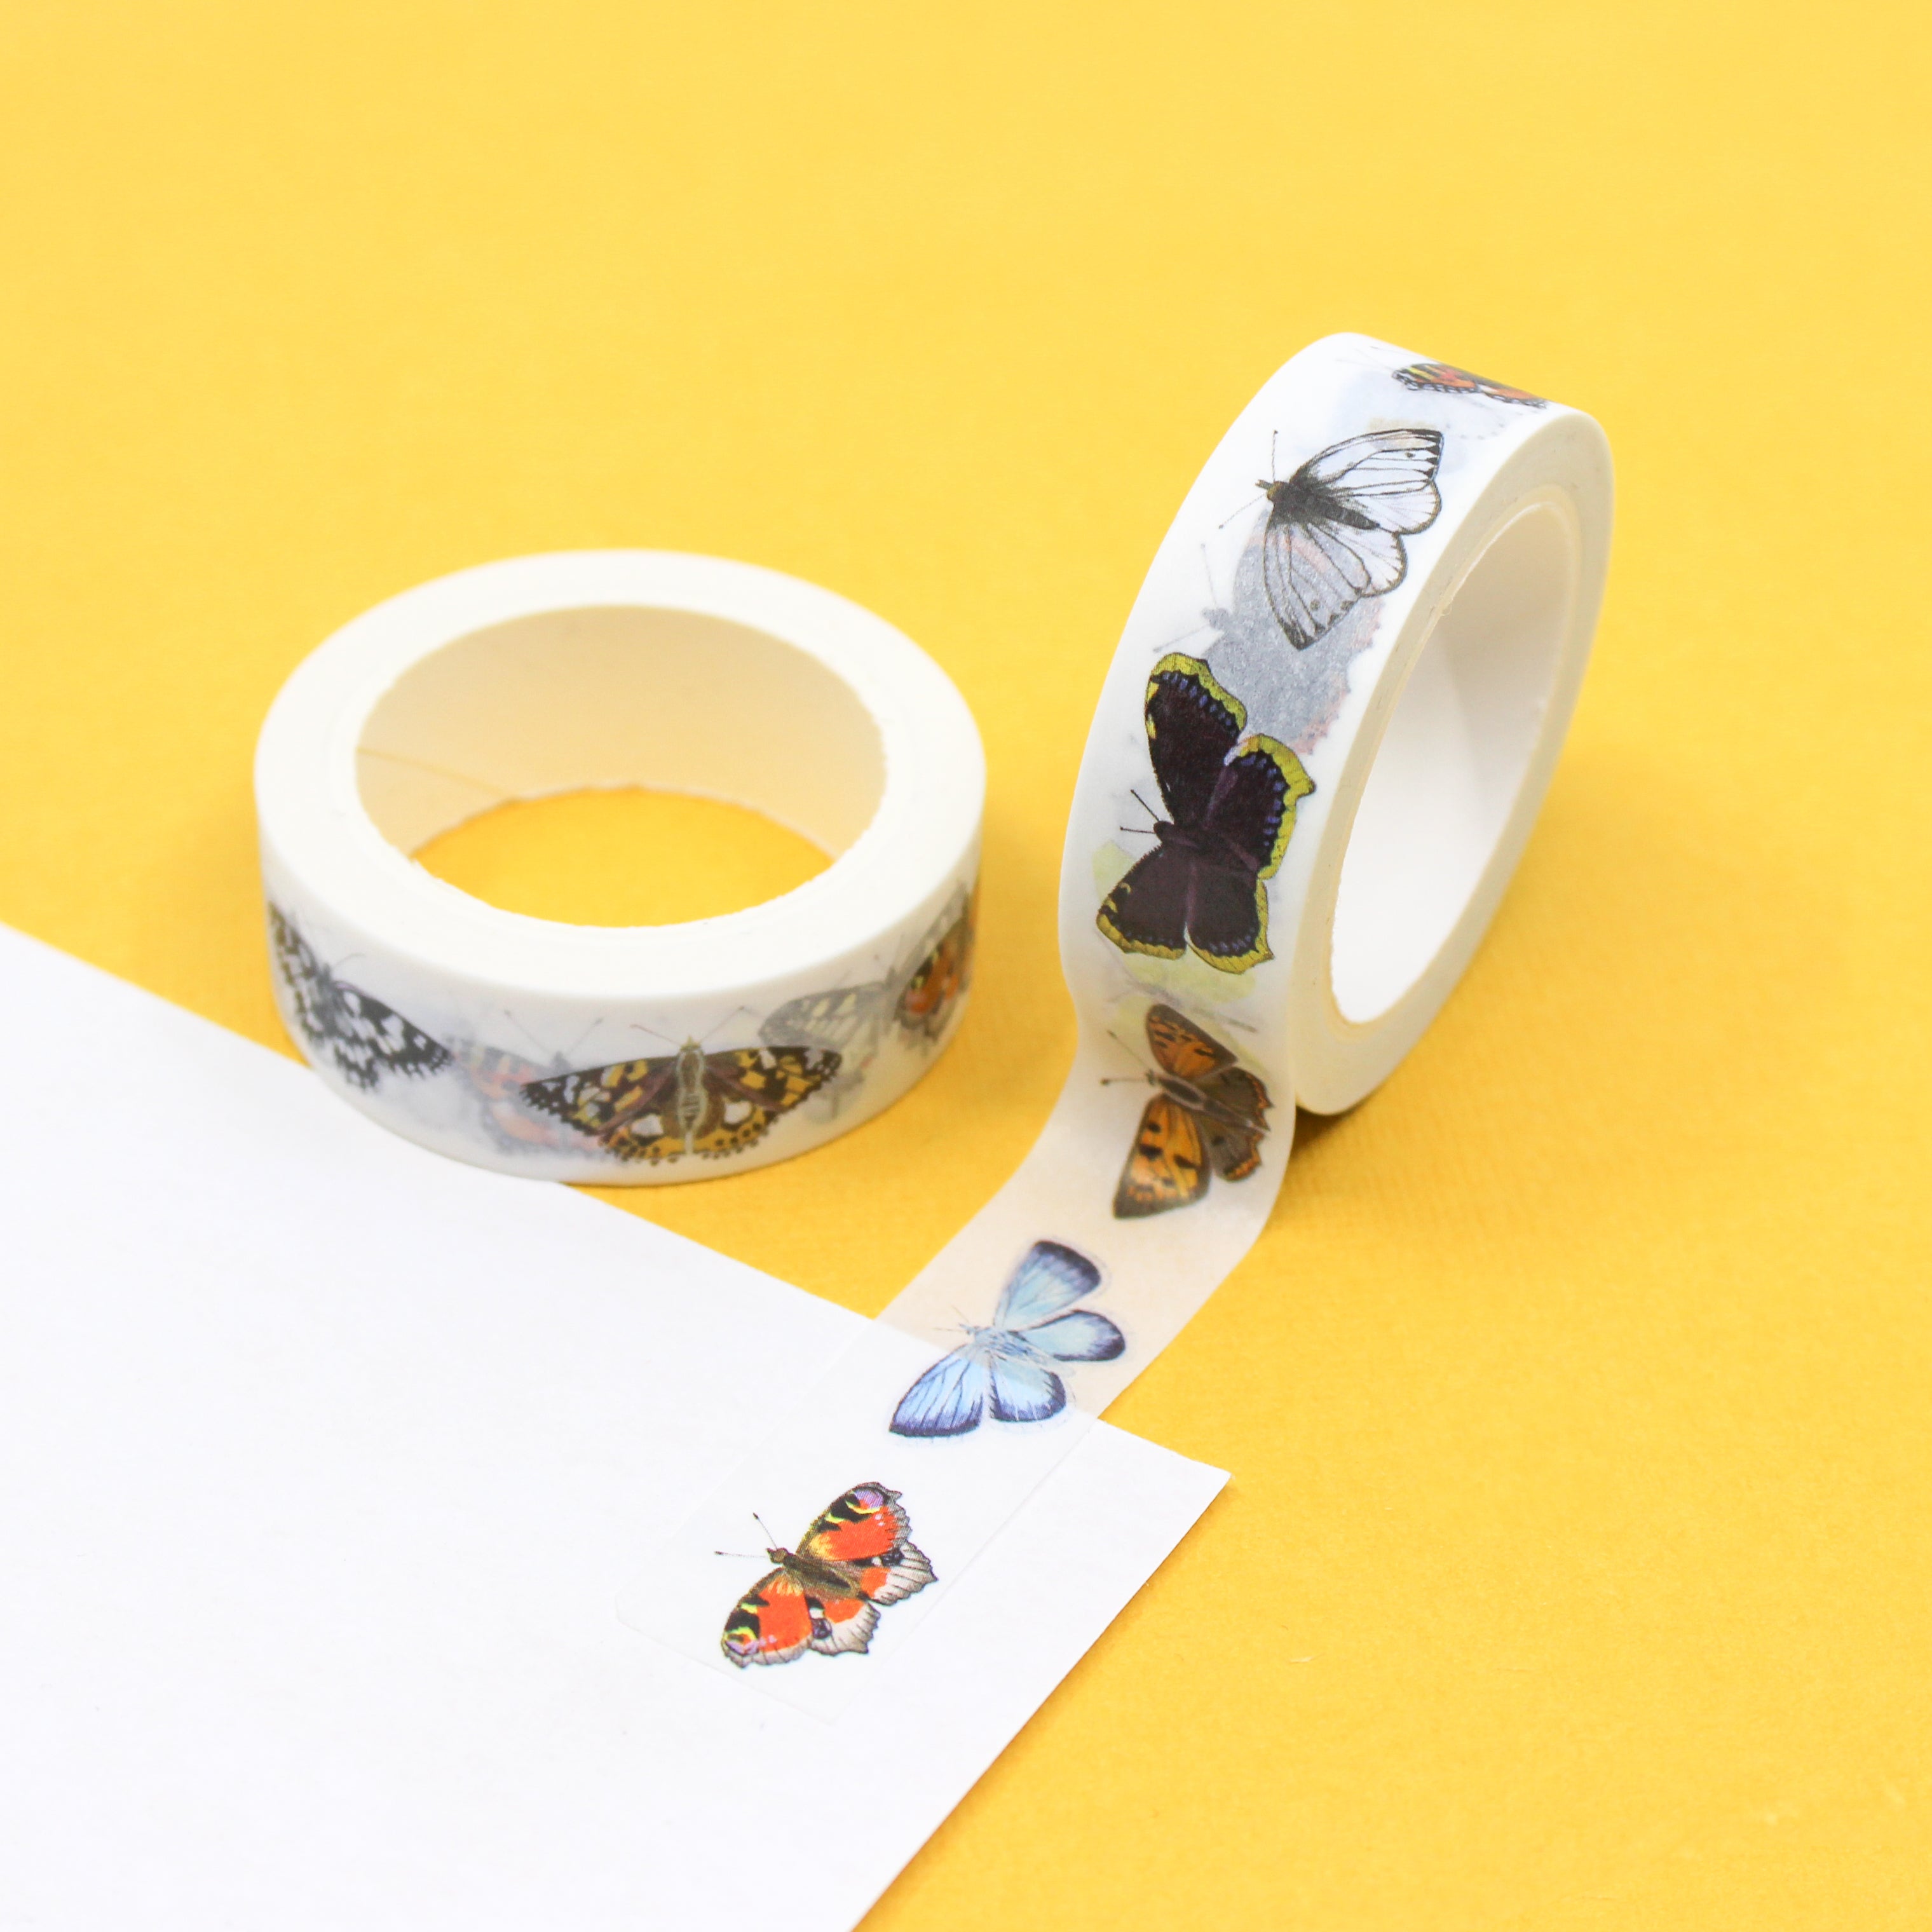 Celebrate the grace of British butterflies with our British Butterfly Washi Tape, featuring delicate illustrations of native butterfly species. Ideal for adding a touch of natural beauty and elegance to your projects. This tape is designed by Sarah Francis and sold at BBB Supplies Craft Shop.